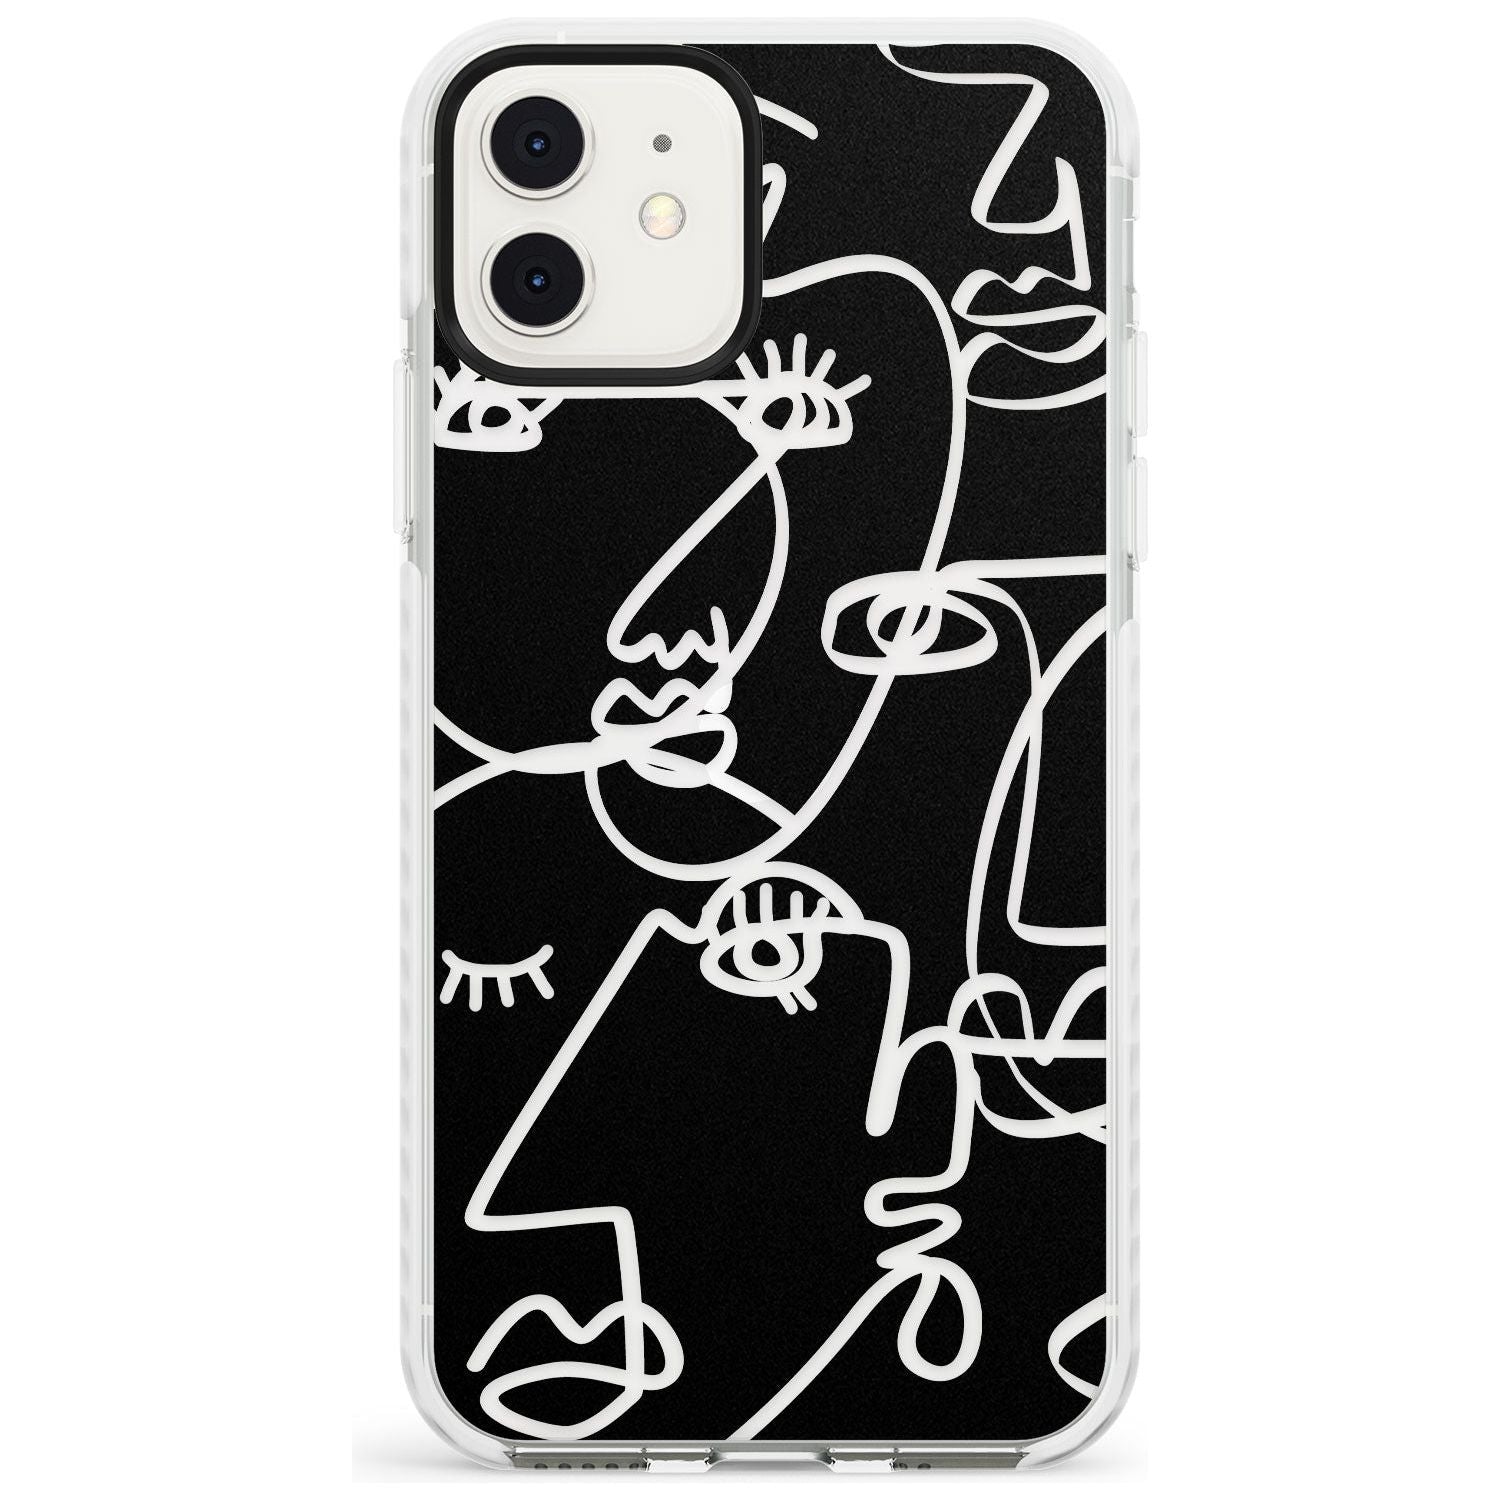 Continuous Line Faces: Clear on Black Slim TPU Phone Case for iPhone 11